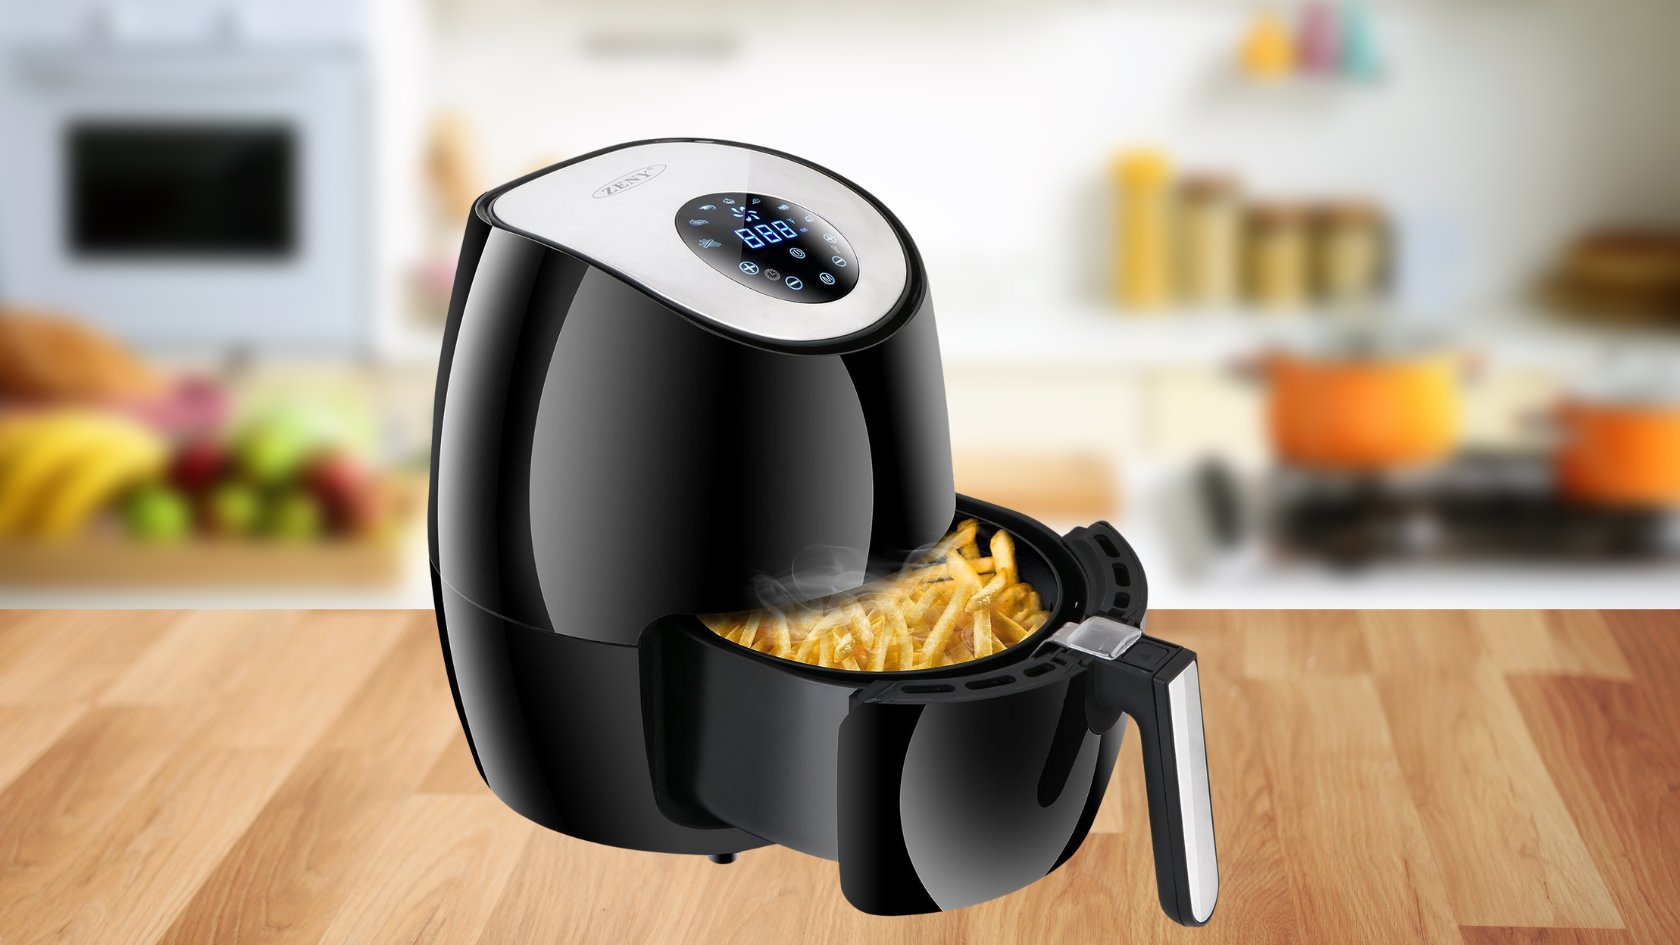 Secura Air Fryer 3.4Qt / 3.2L 1500-Watt Electric Hot XL Air Fryers Oven Oil  Free Nonstick Cooker with Additional Accessories, Recipes, BBQ Rack &  Skewers for Frying, Roasting, Grilling 